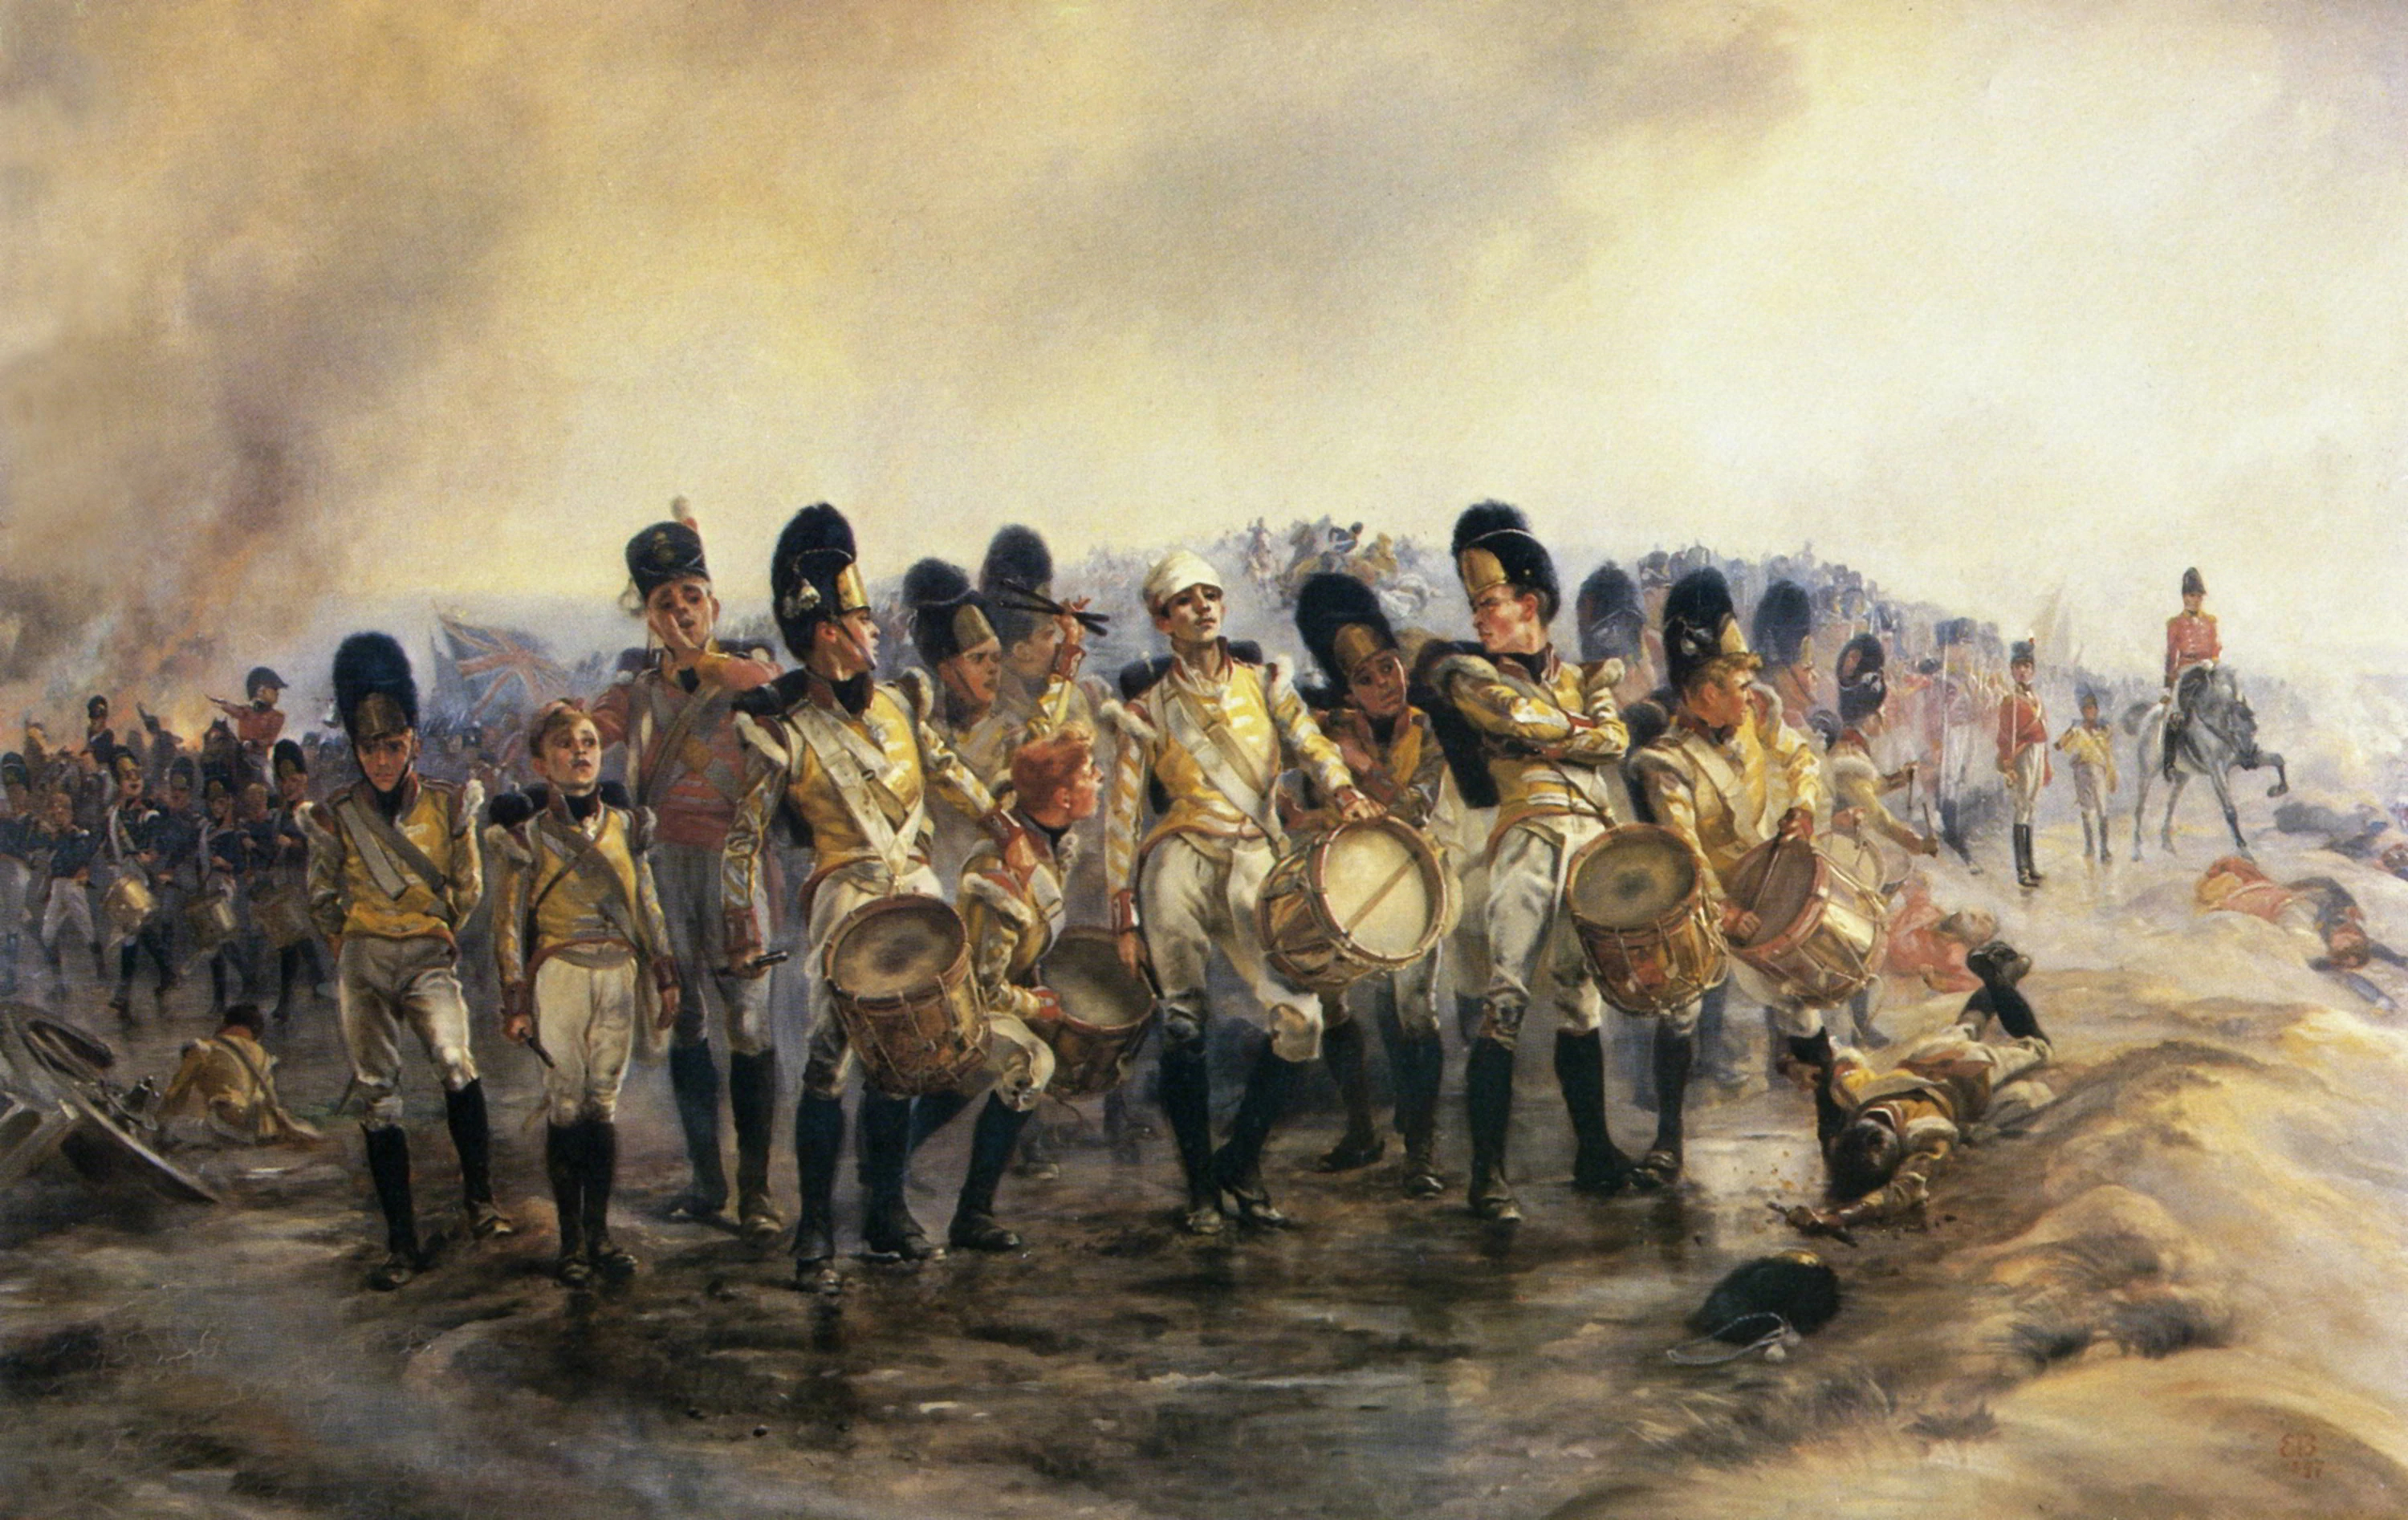 Steady the Drums and Fifes!, Elizabeth Thompson